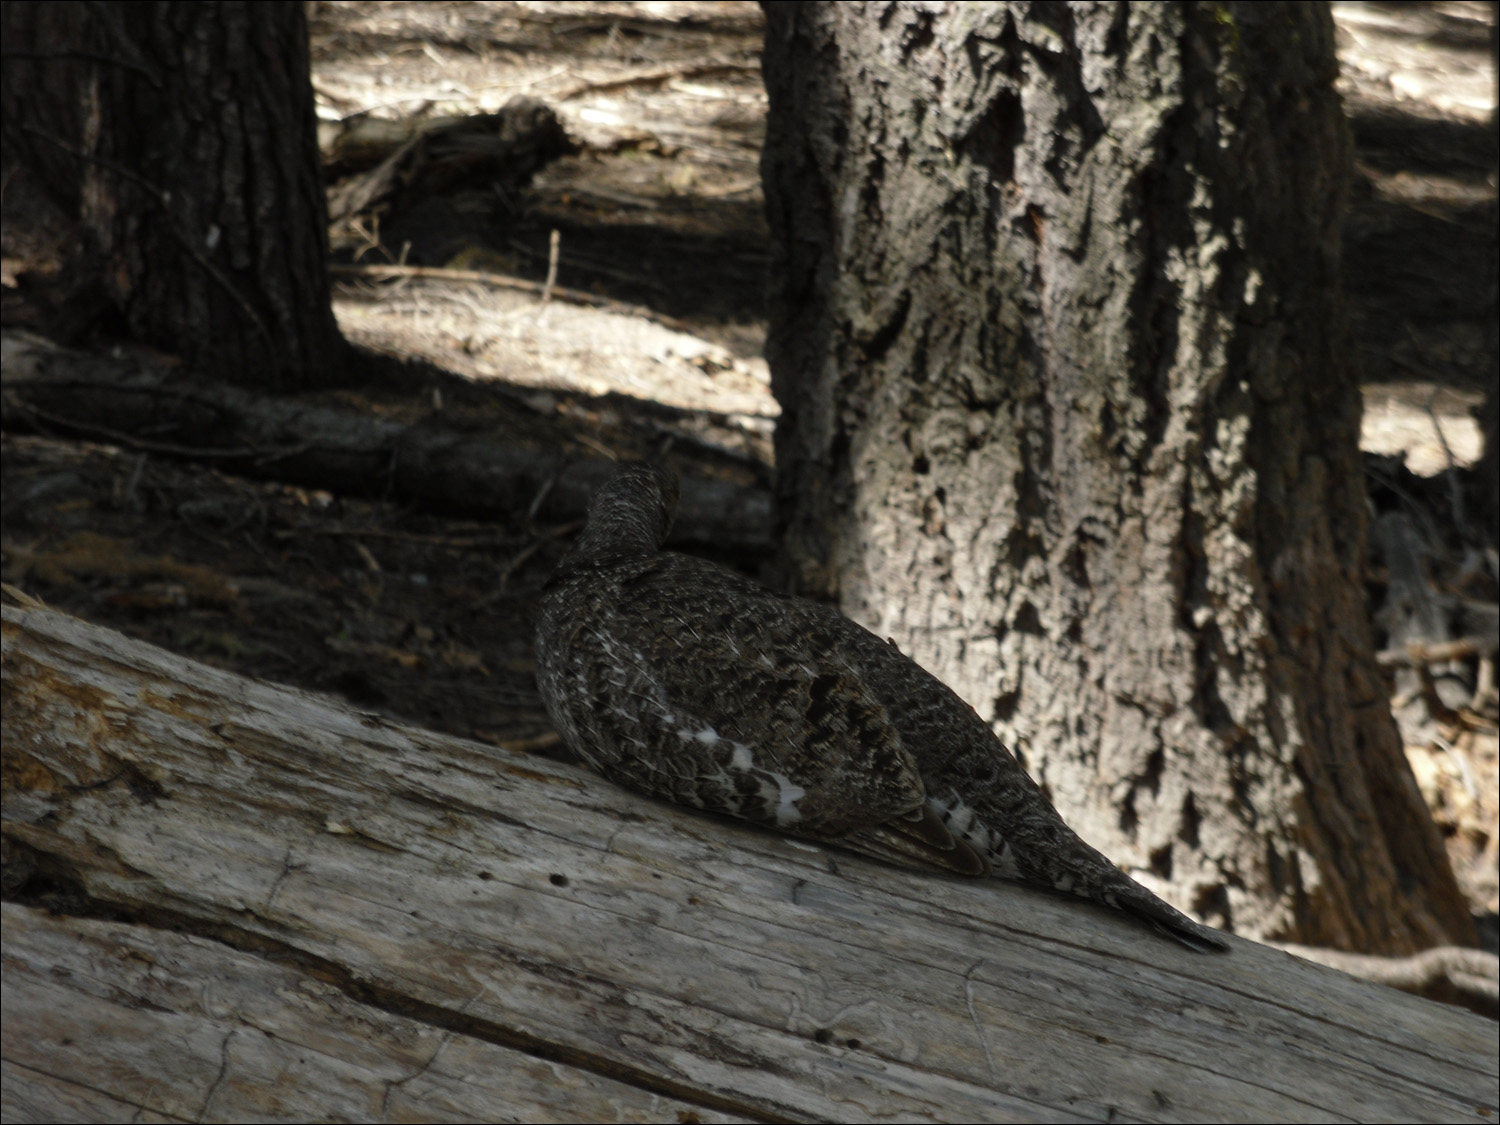 Hike up to Glacier Point- Wildlife along the way